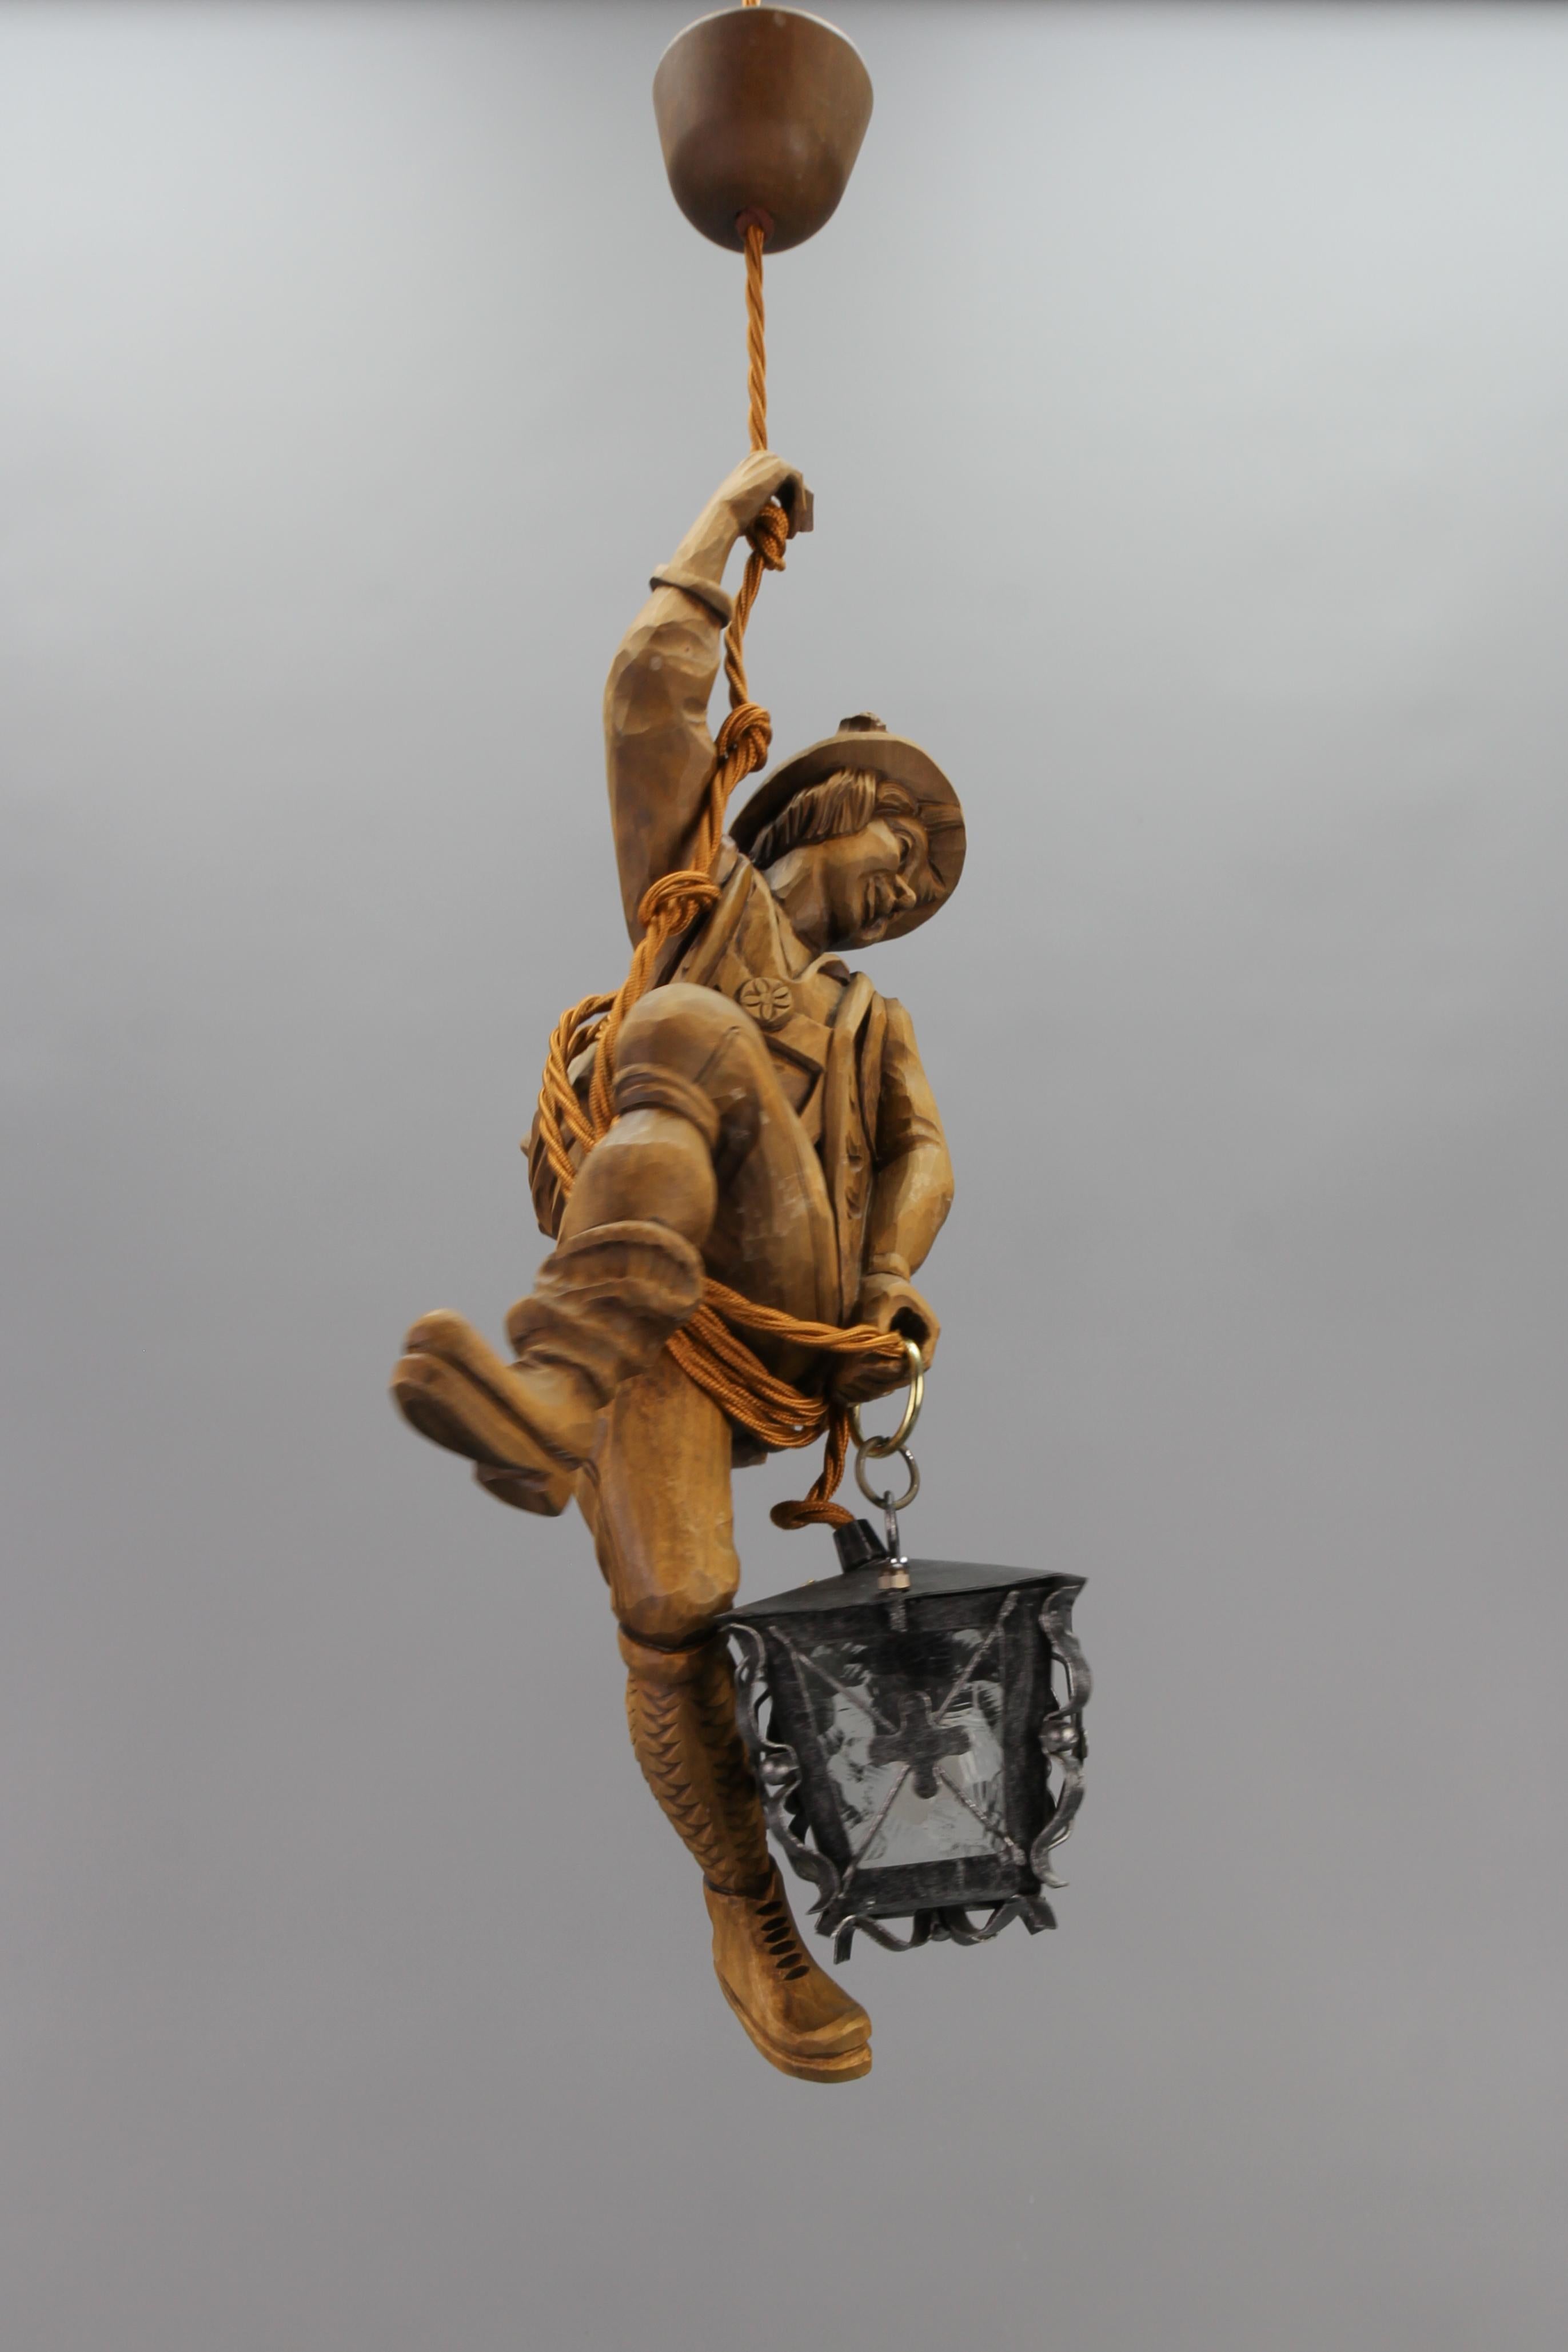 Hand-Carved German Pendant Light with Carved Wooden Figure Mountain Climber and Lantern